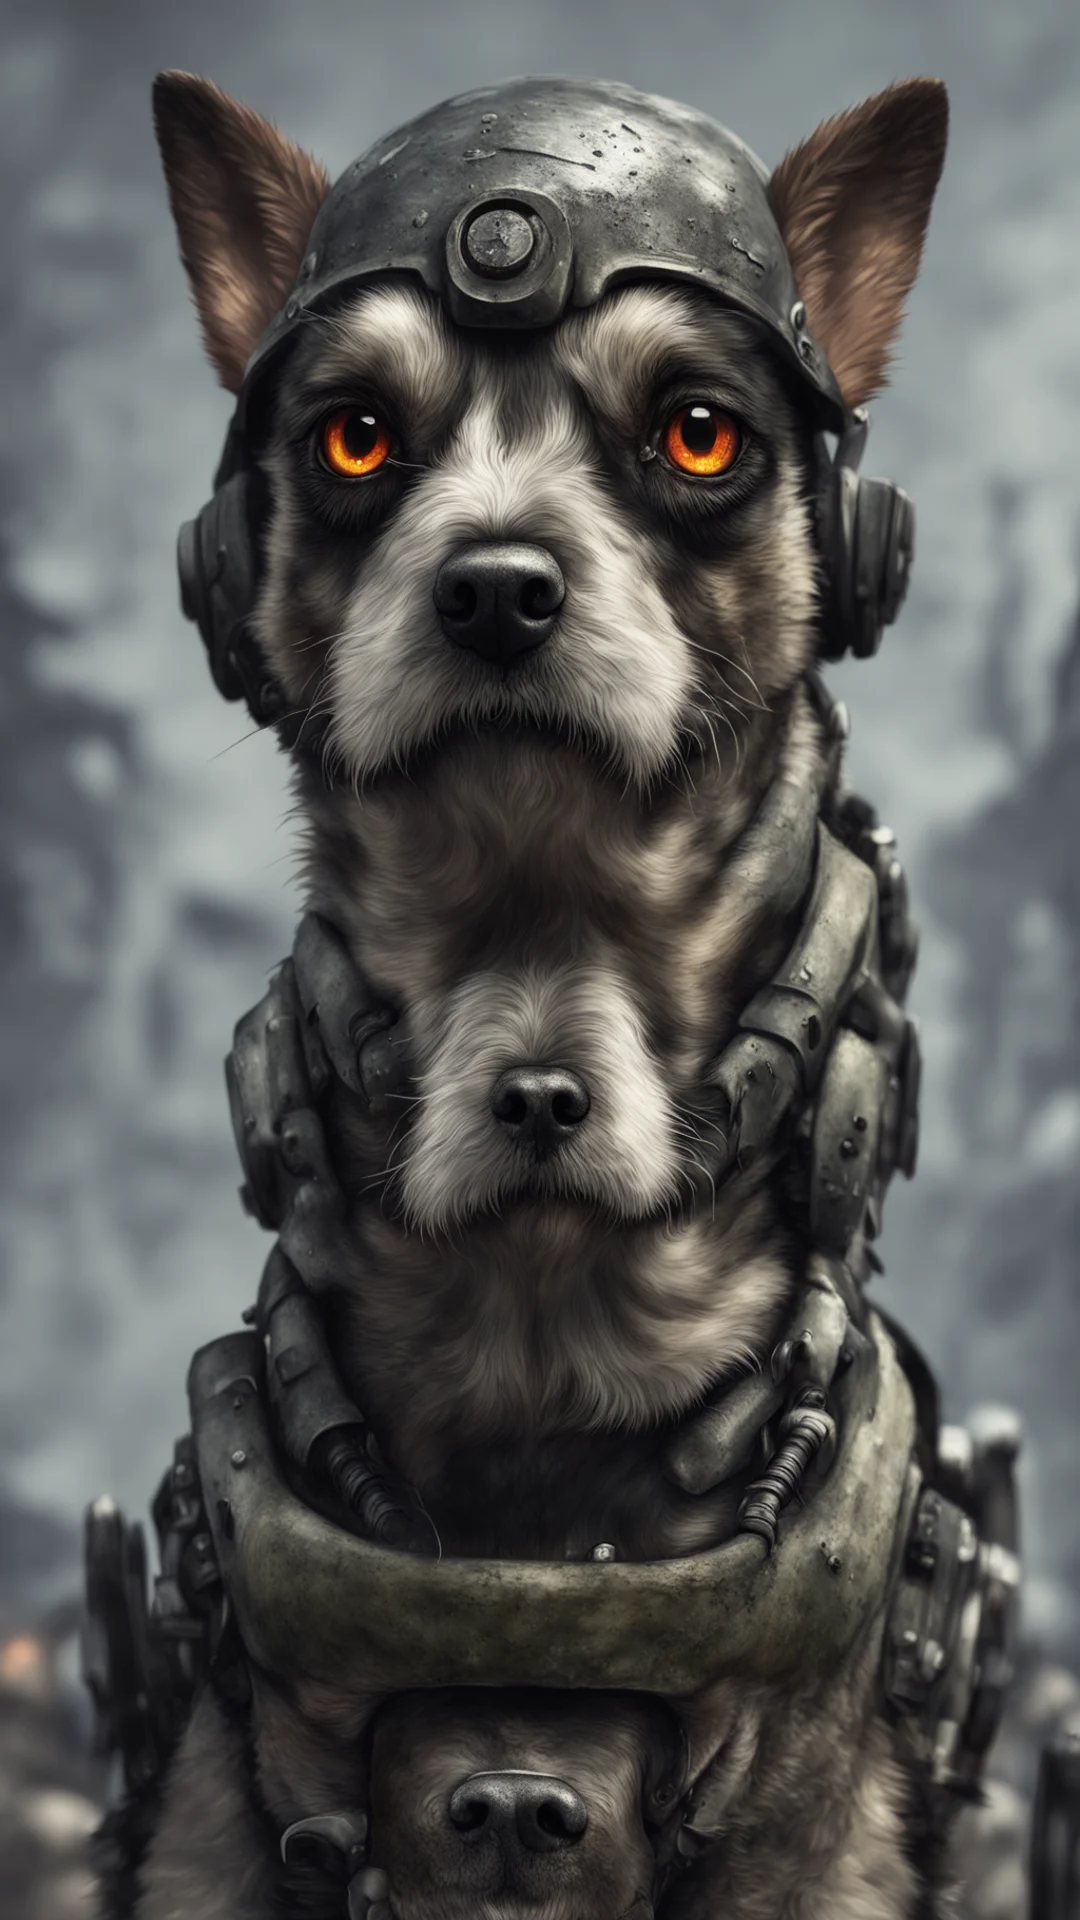 aiartstation art plague dog trooper staring directly into the camera in focus concept art ultra detailed trending on artstation 35mm confident engaging wow 3 tall